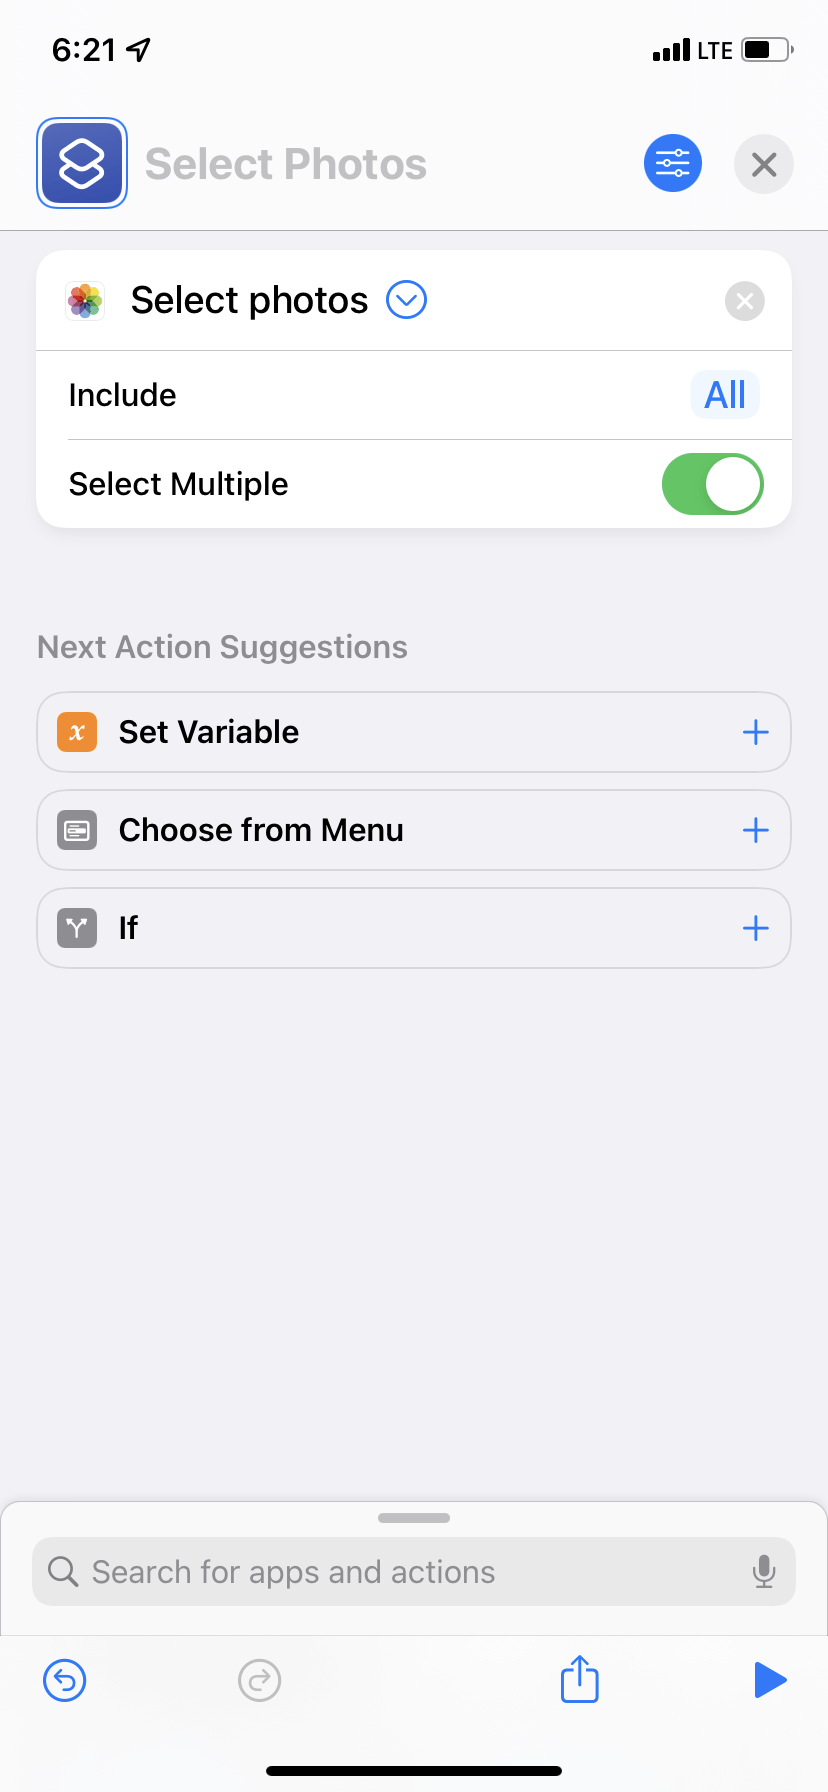 Enable Select Multiple for Photos in iPhone Shortcuts app